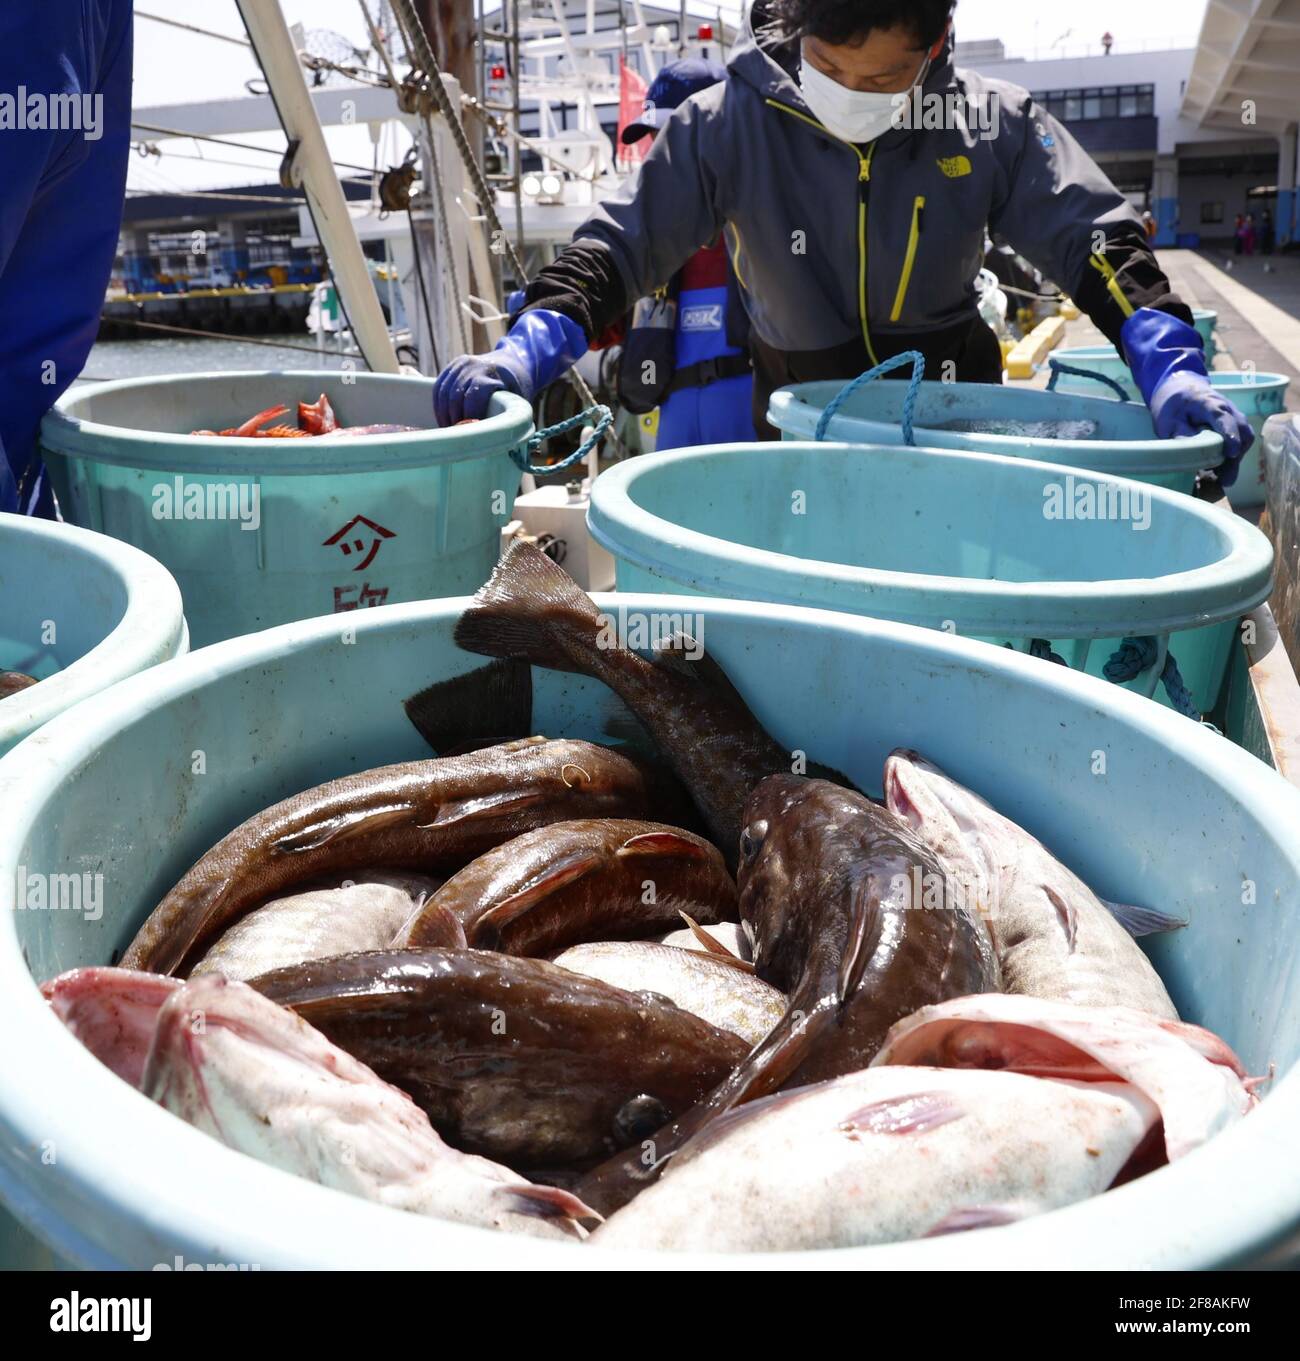 Fukushima Japan April 13 21 A Fisherman Lands Fish At A Port In Soma In Fukushima Prefecture Northeastern Japan On April 12 21 The Japanese Government Decided On April 13 To Release